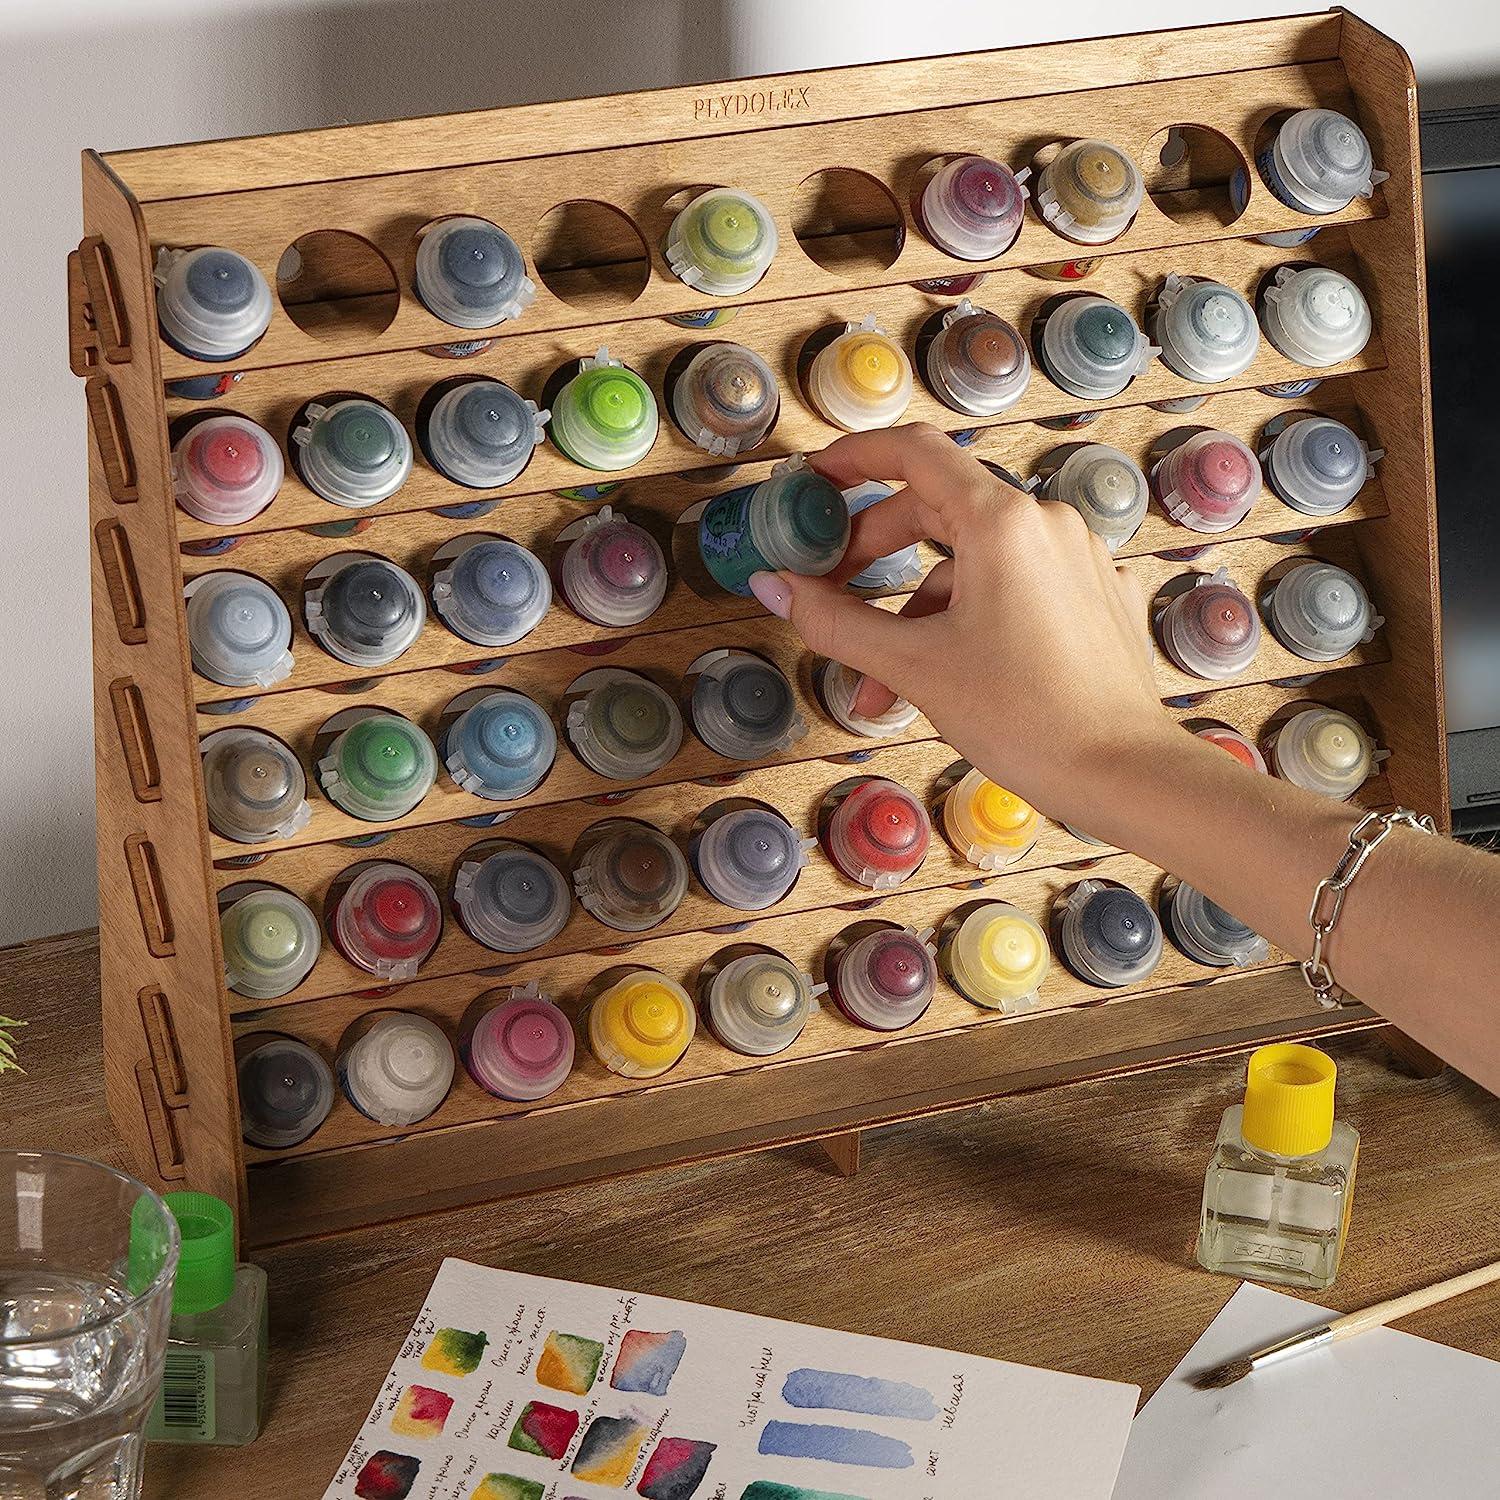 PLYDOLEX Wooden Paint Organizer for 74 Bottles of Paints and 14 Paint –  Plywood Organizers for Miniaute Painters - Wooden HandCraft Gift and  Accessories by Plydolex